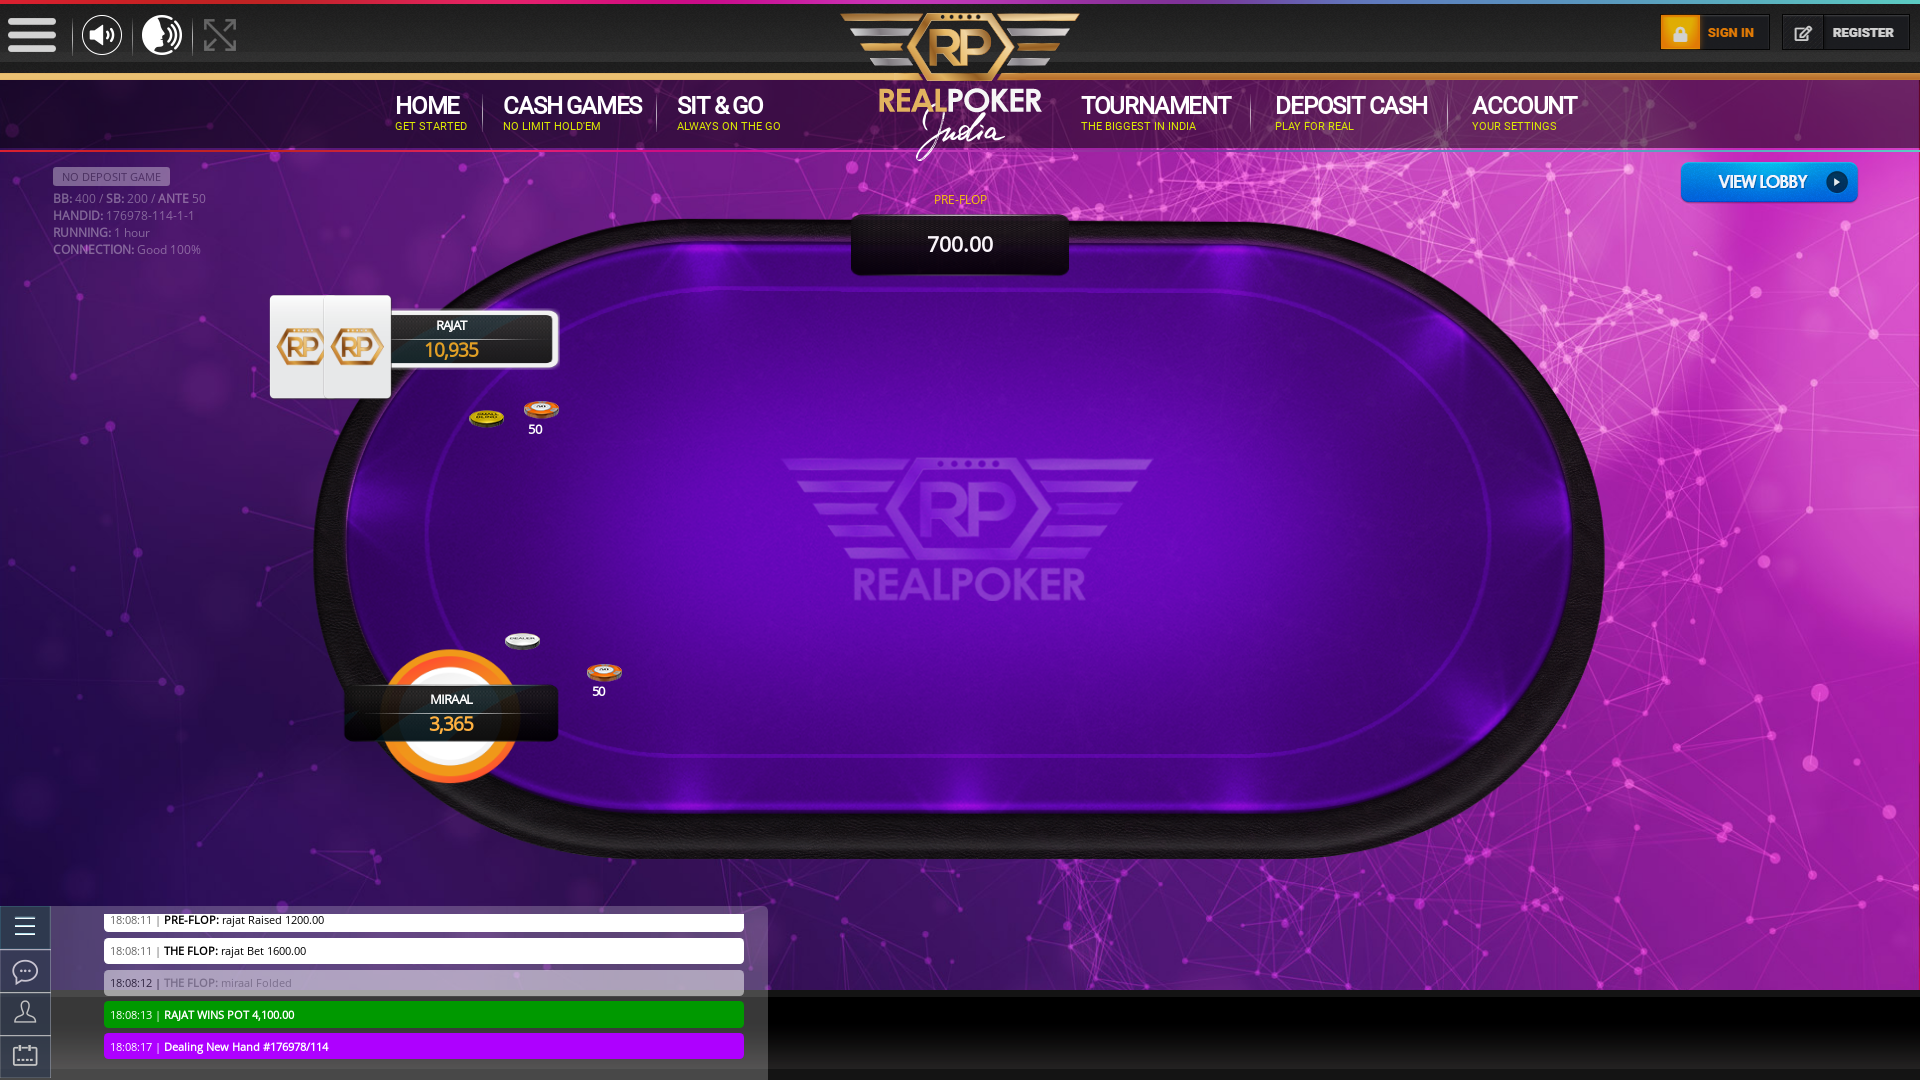 Online poker on a 10 player table in the 61st minute match up